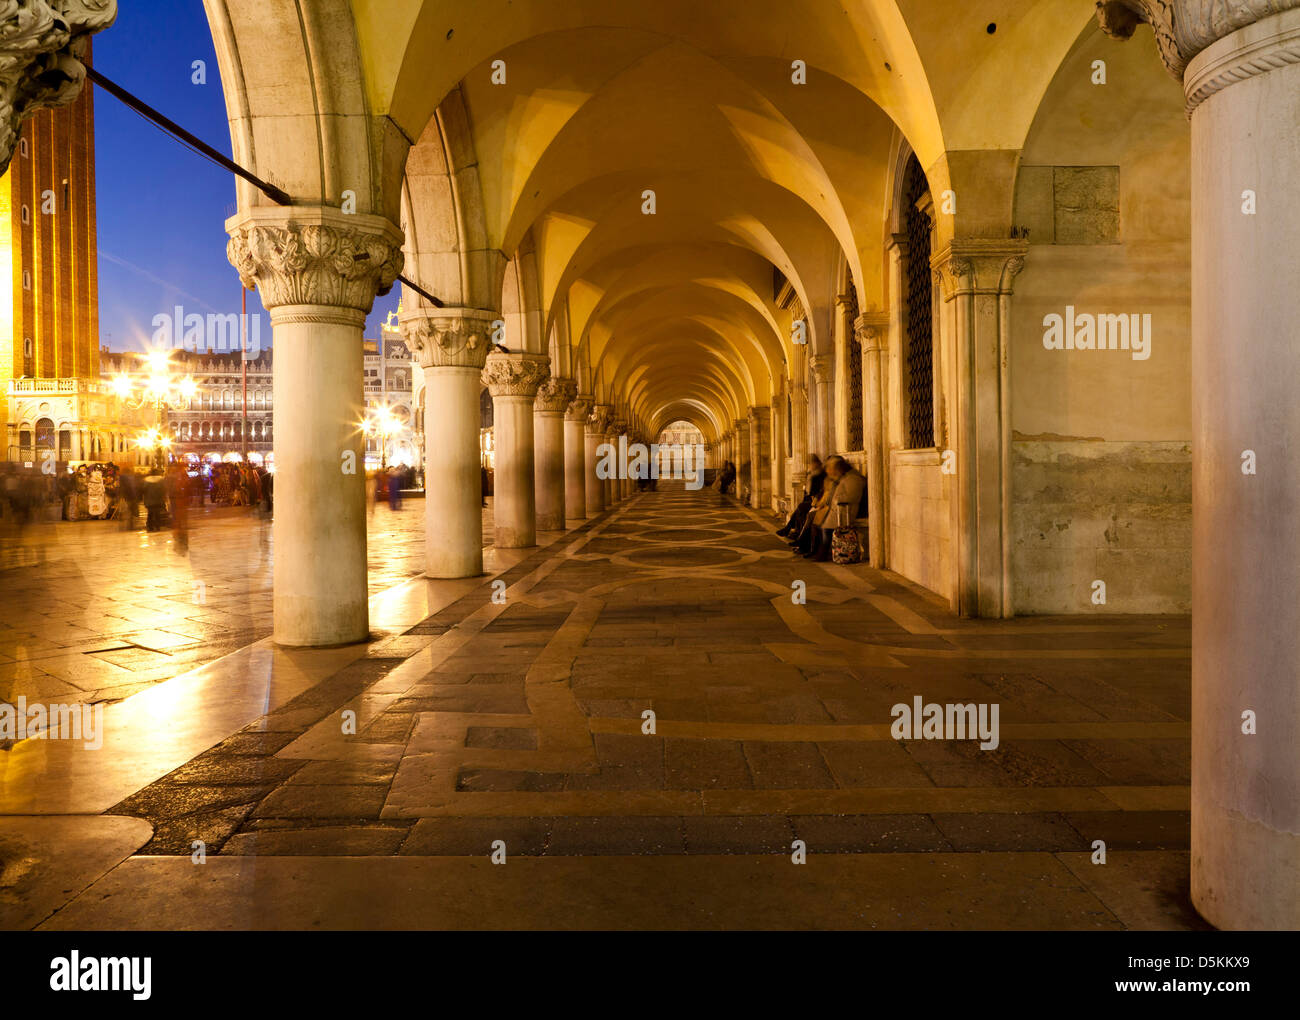 Venice at night. St Mark's Square. Colonnade and arches. People in the square Stock Photo